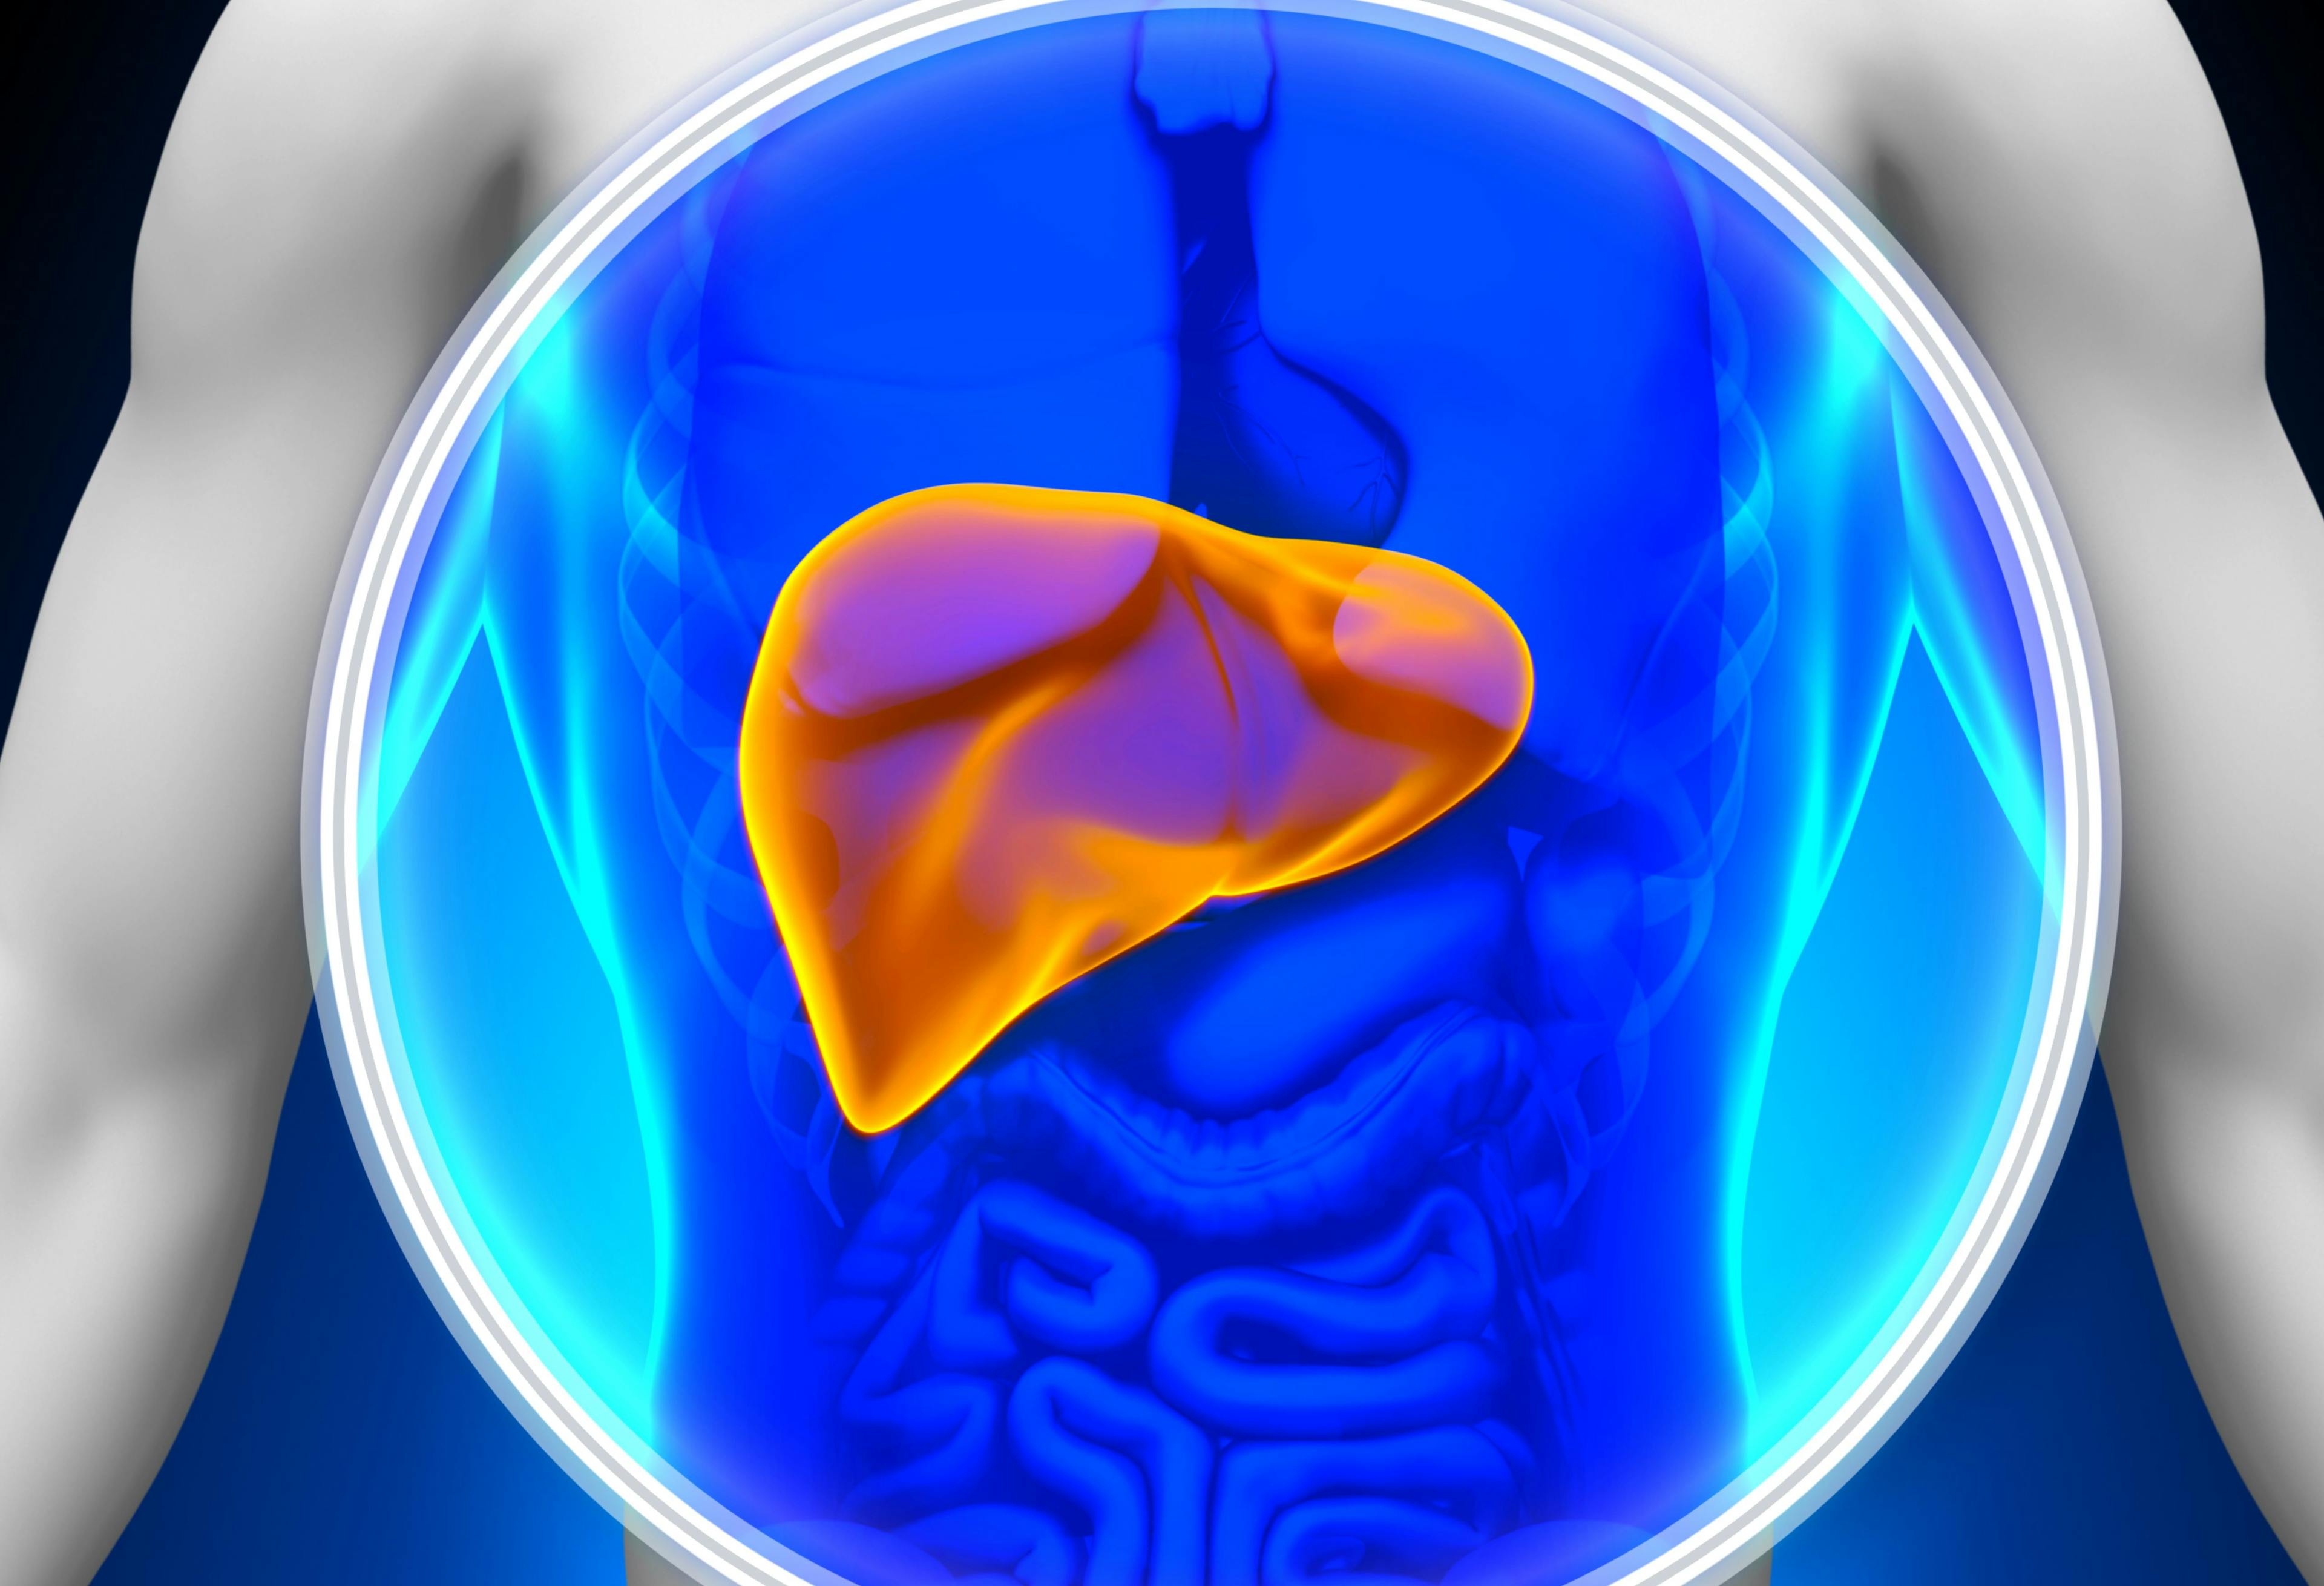 Bariatric Surgery Could Cut Risk of Adverse Liver, Cardiovascular Outcomes in NASH